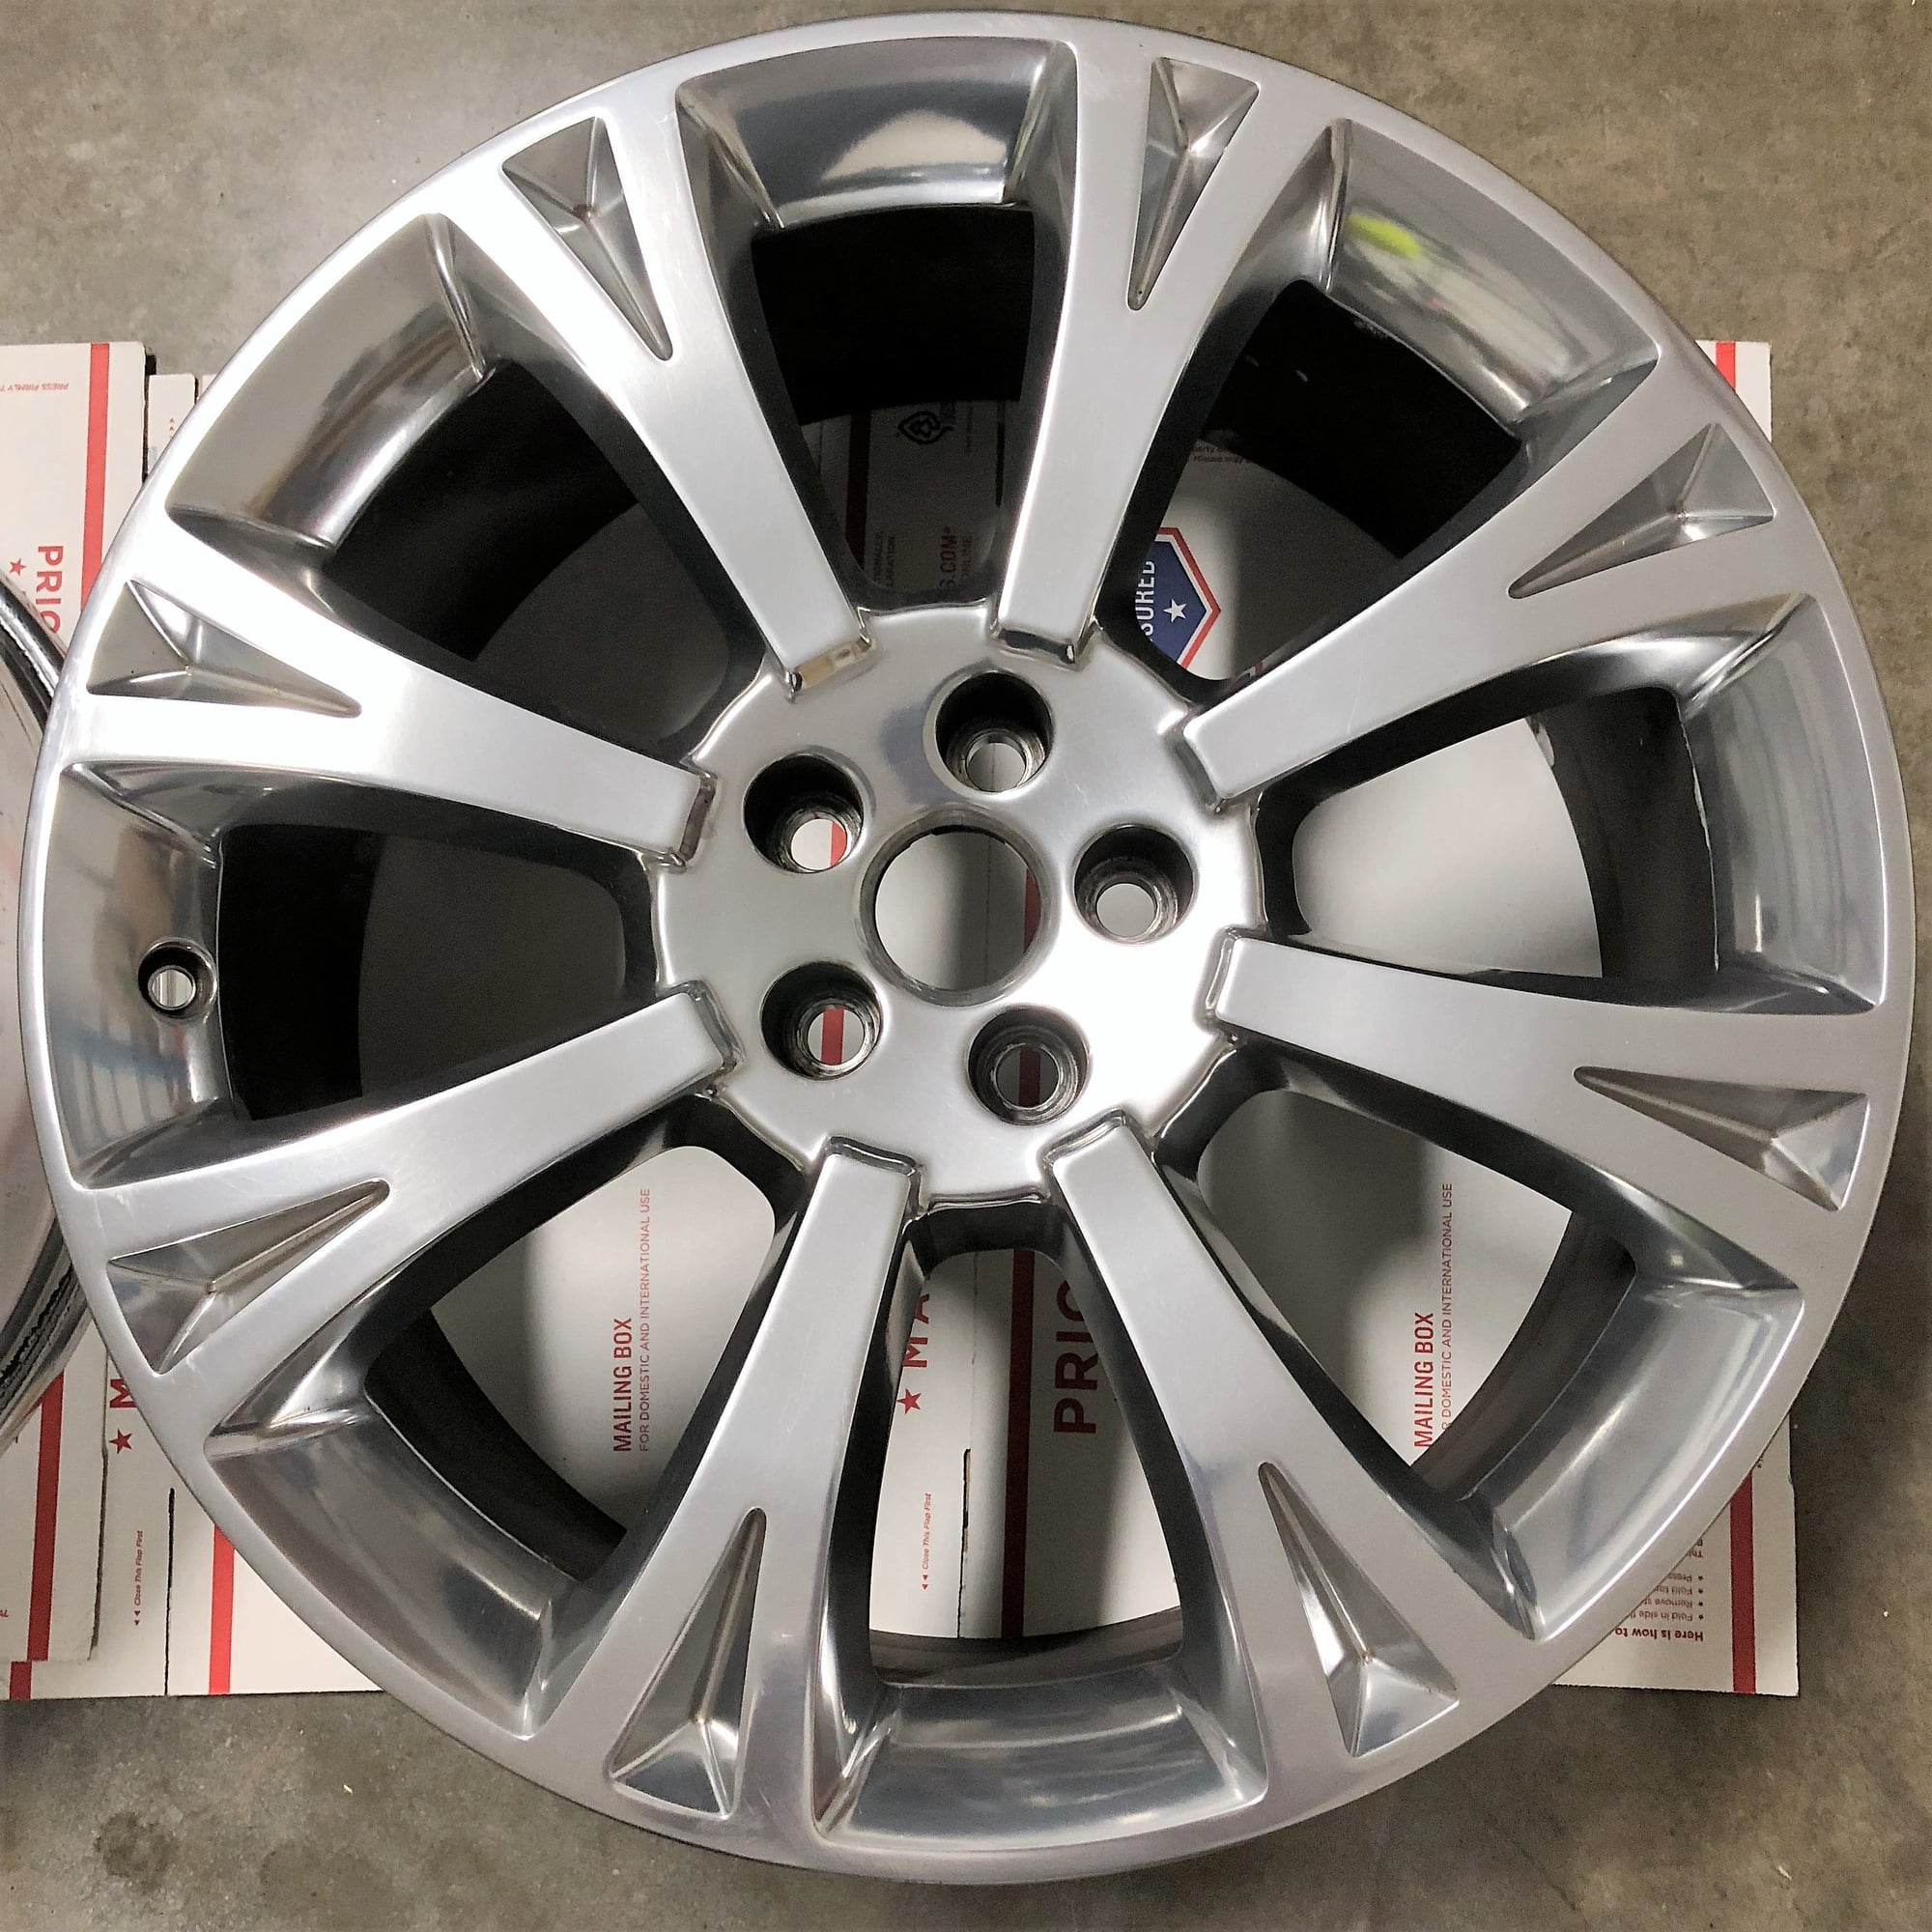 Wheels and Tires/Axles - Factory-Polished Orona Wheels (20" Staggered set from 2013 XKR) - Used - Plano, TX 75093, United States